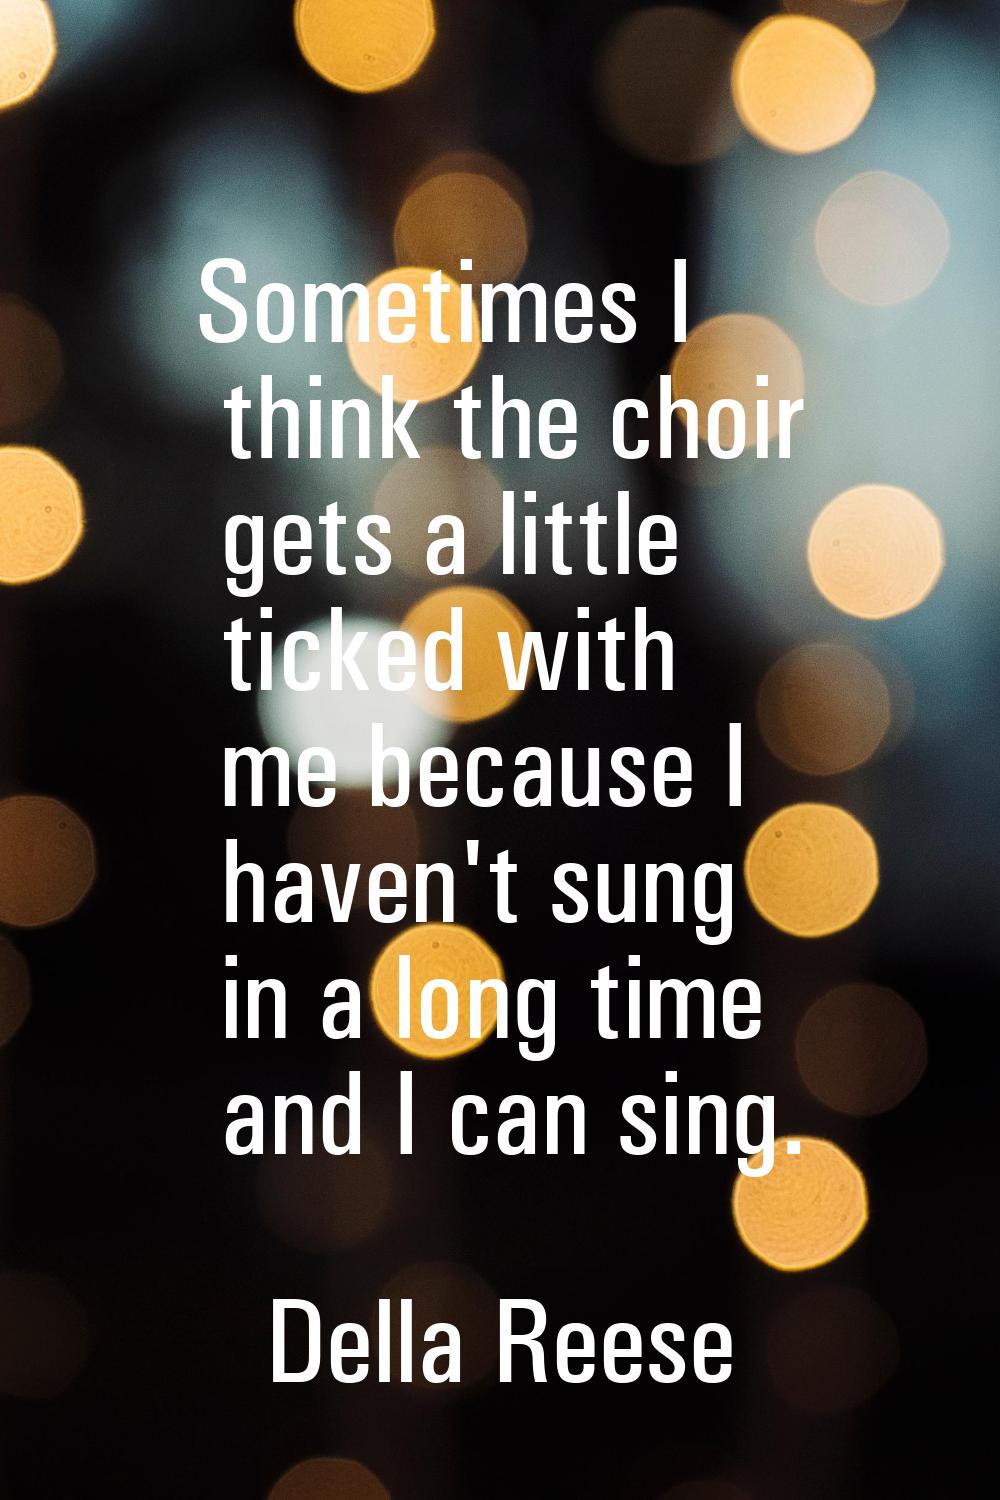 Sometimes I think the choir gets a little ticked with me because I haven't sung in a long time and 